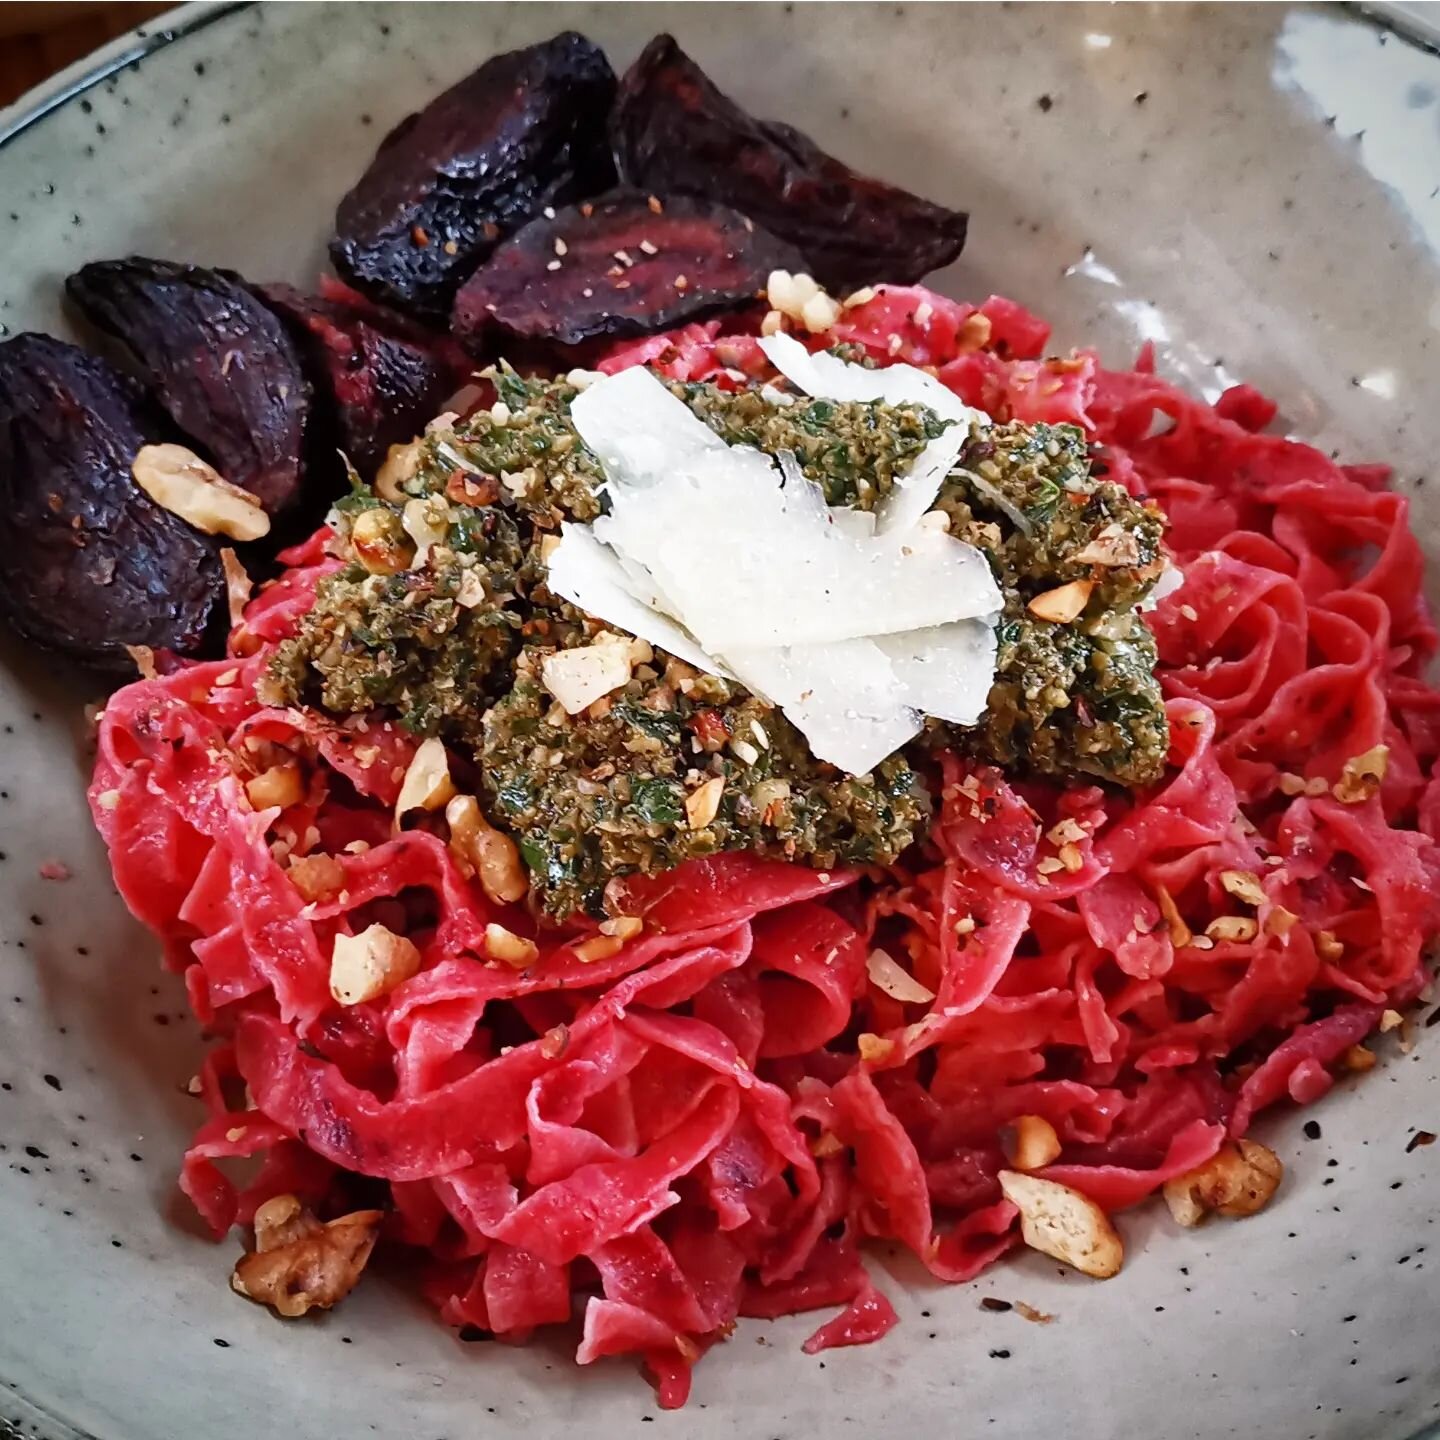 Homemade fresh beetroot pasta 🍝 with homegarden grown basil pesto 🌱 + a dash of pecorino shavings🐑! Had a very good mate over who was responsible for designing and building the center piece bamboo table. A table to carry a feast for the eyes 👀 an